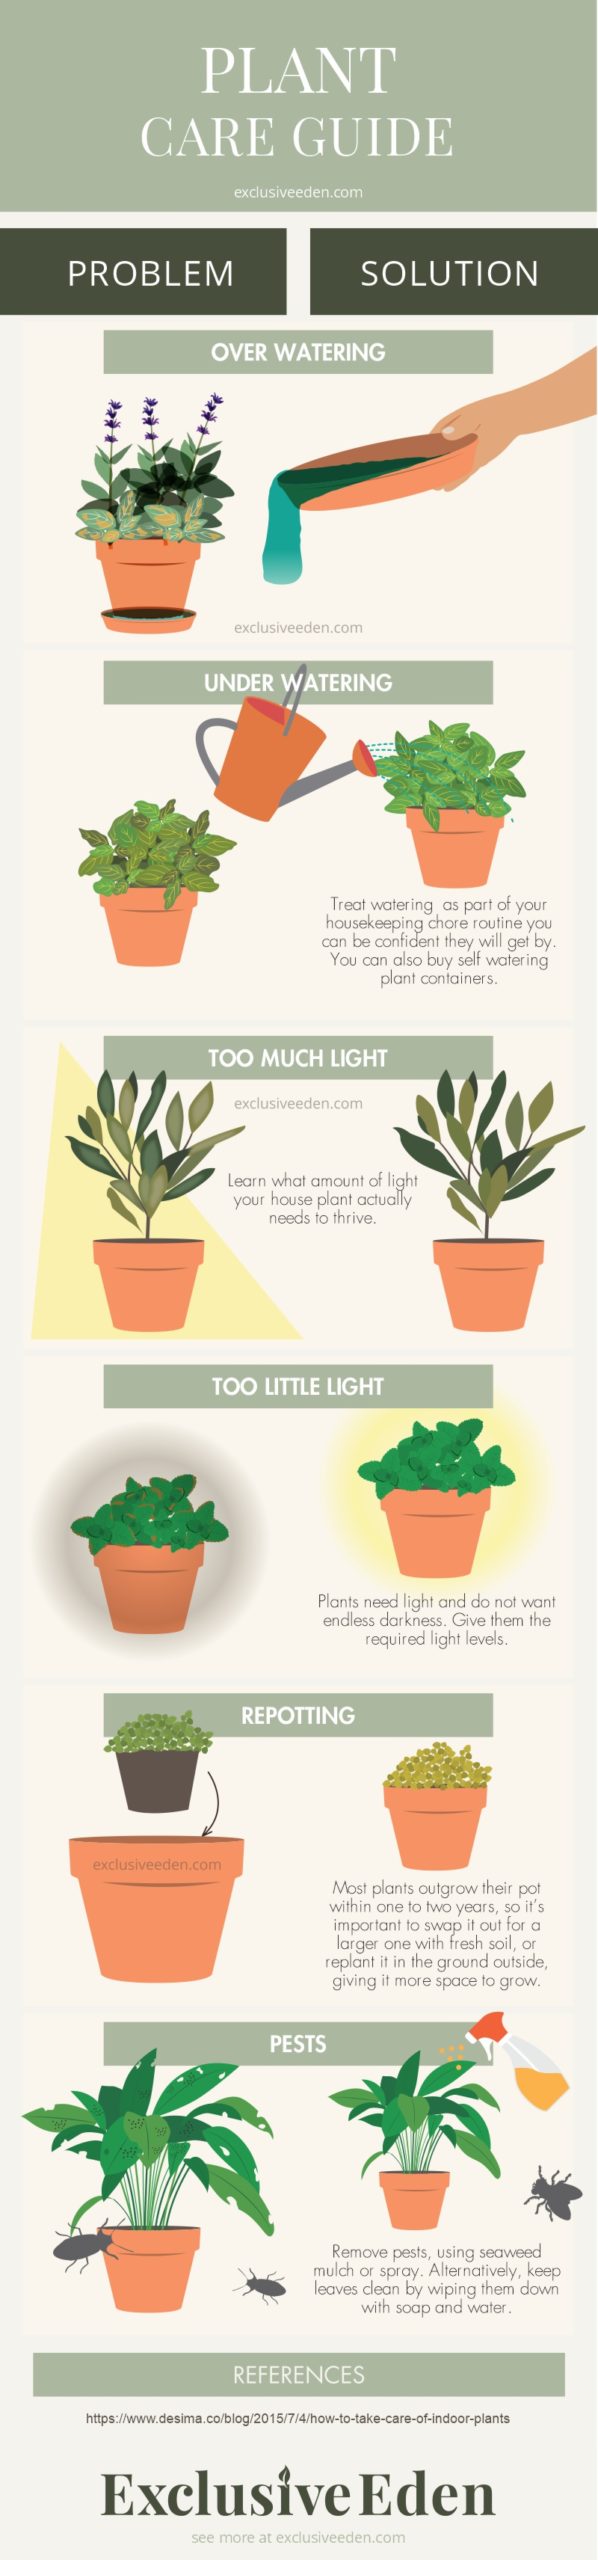 A plant care guide illustrated as an infographic.